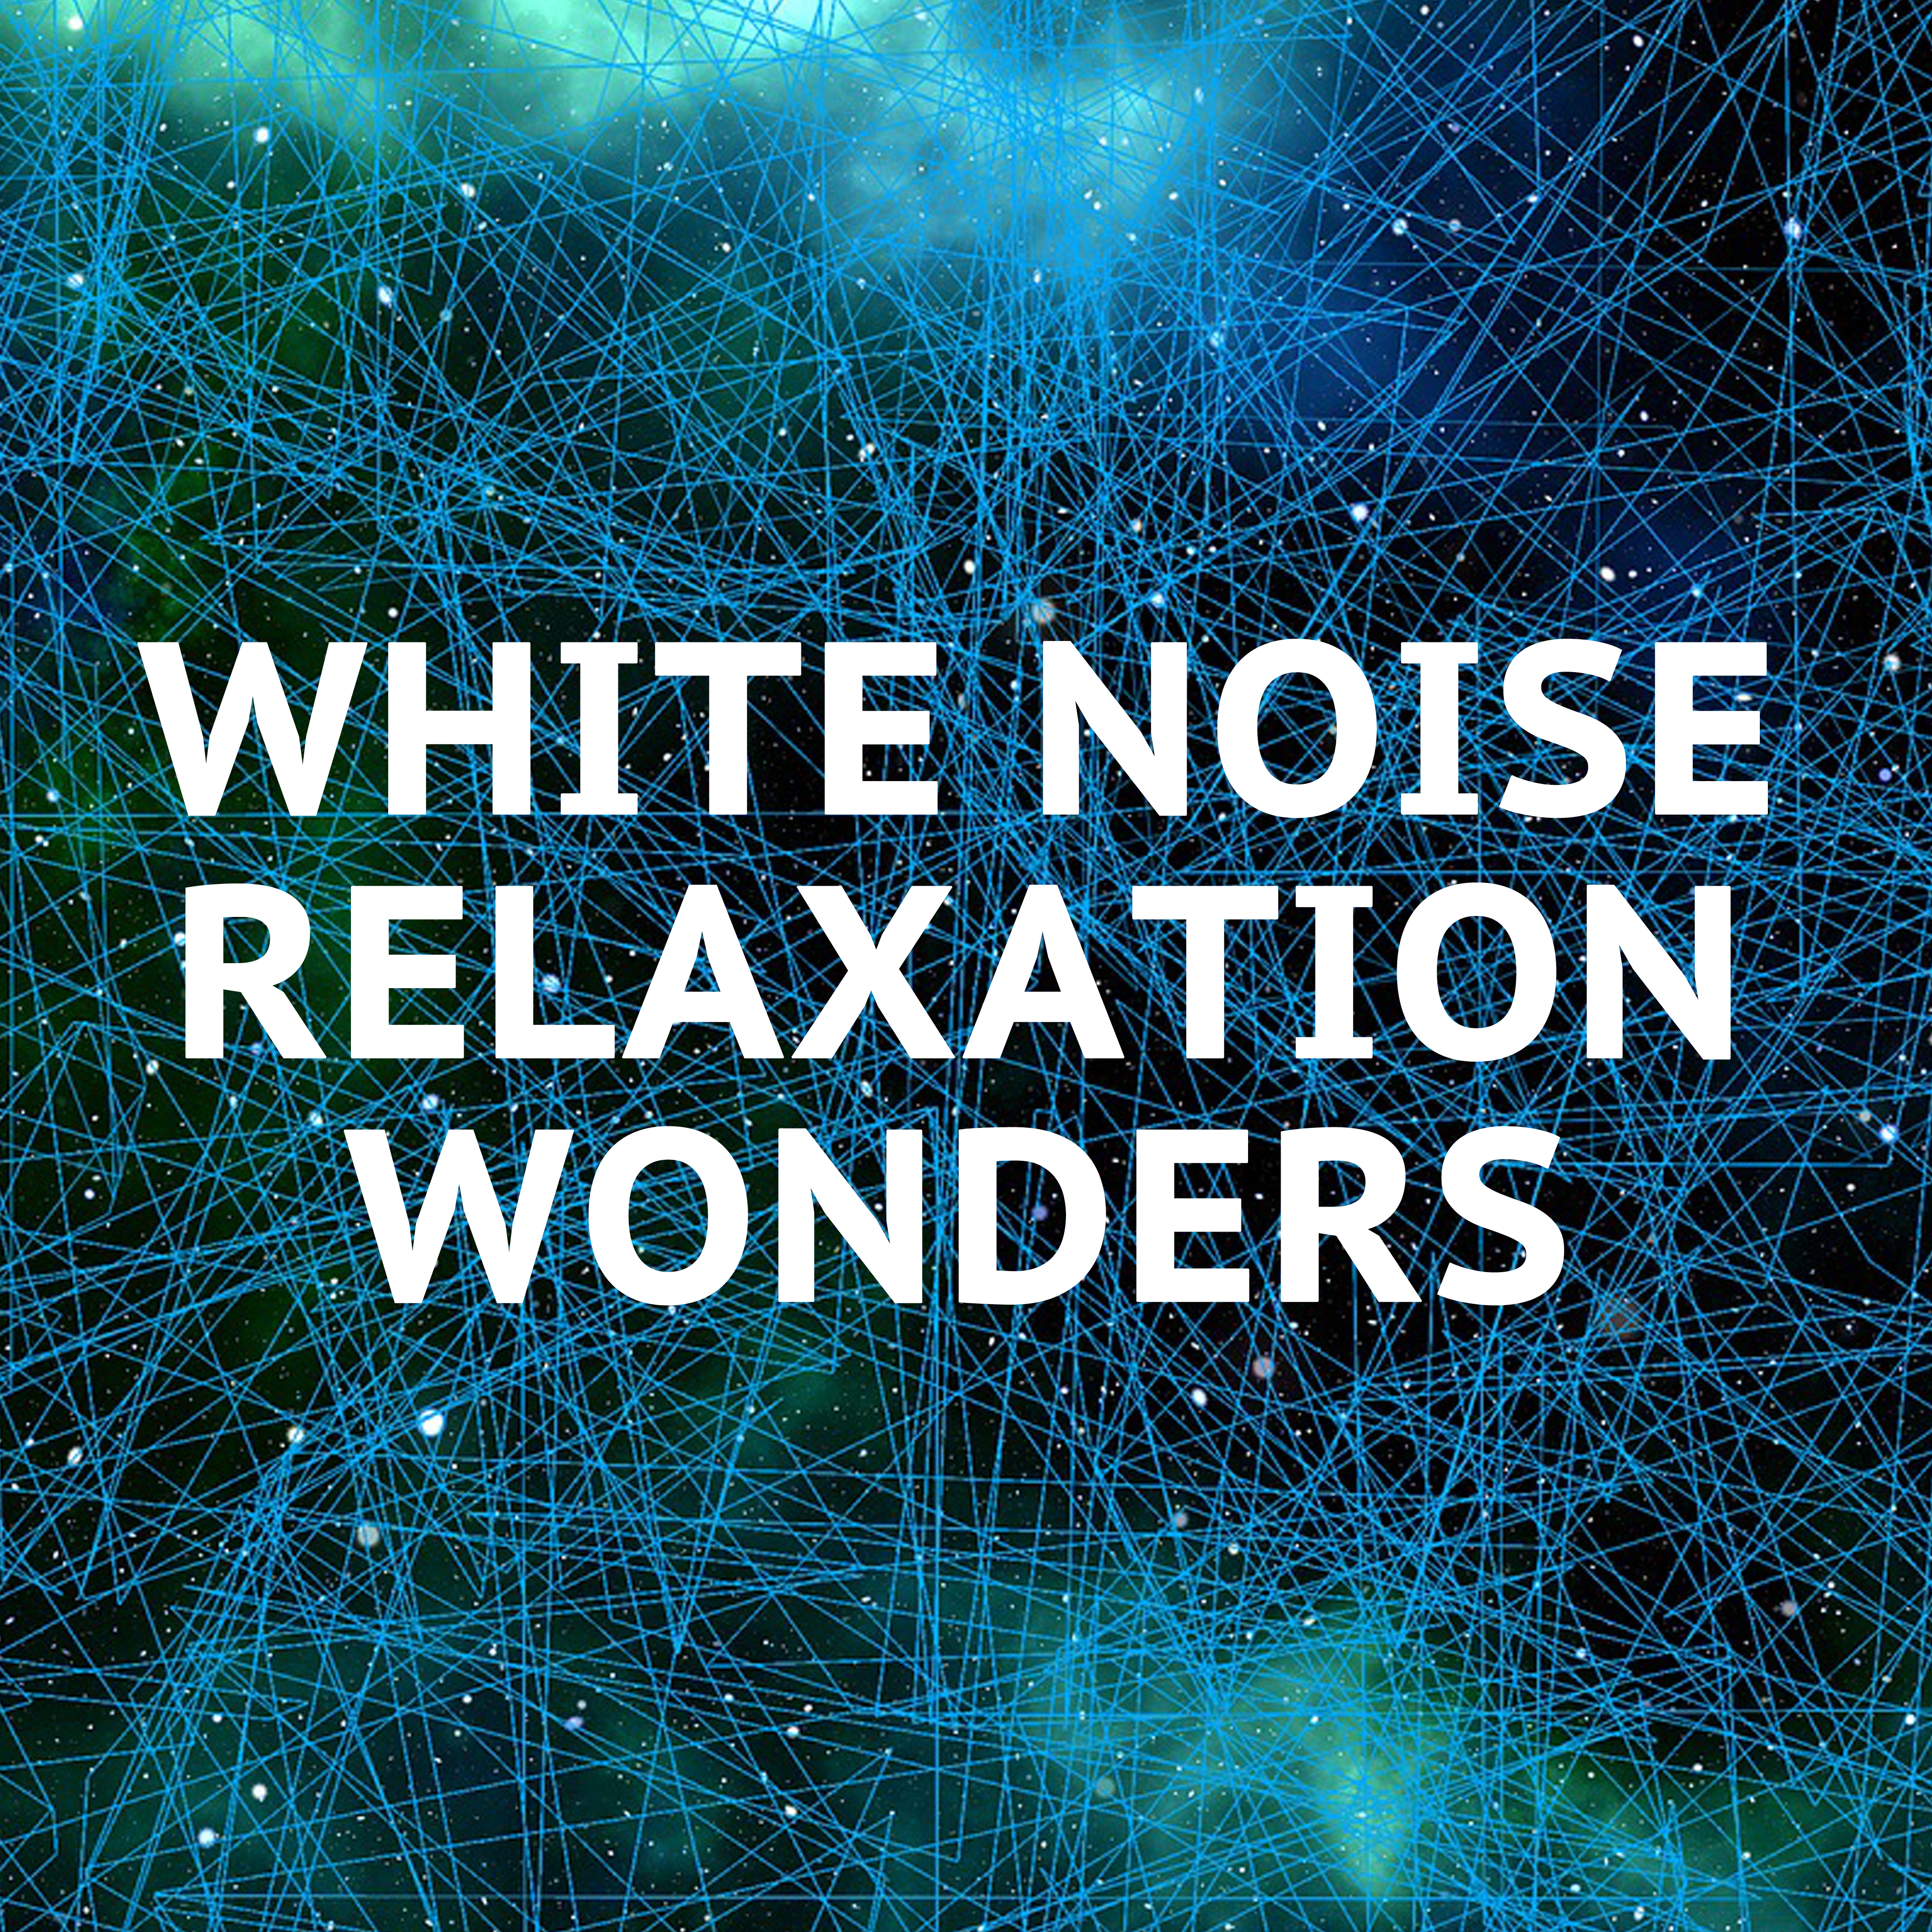 17 White Noise Relaxation Wonders